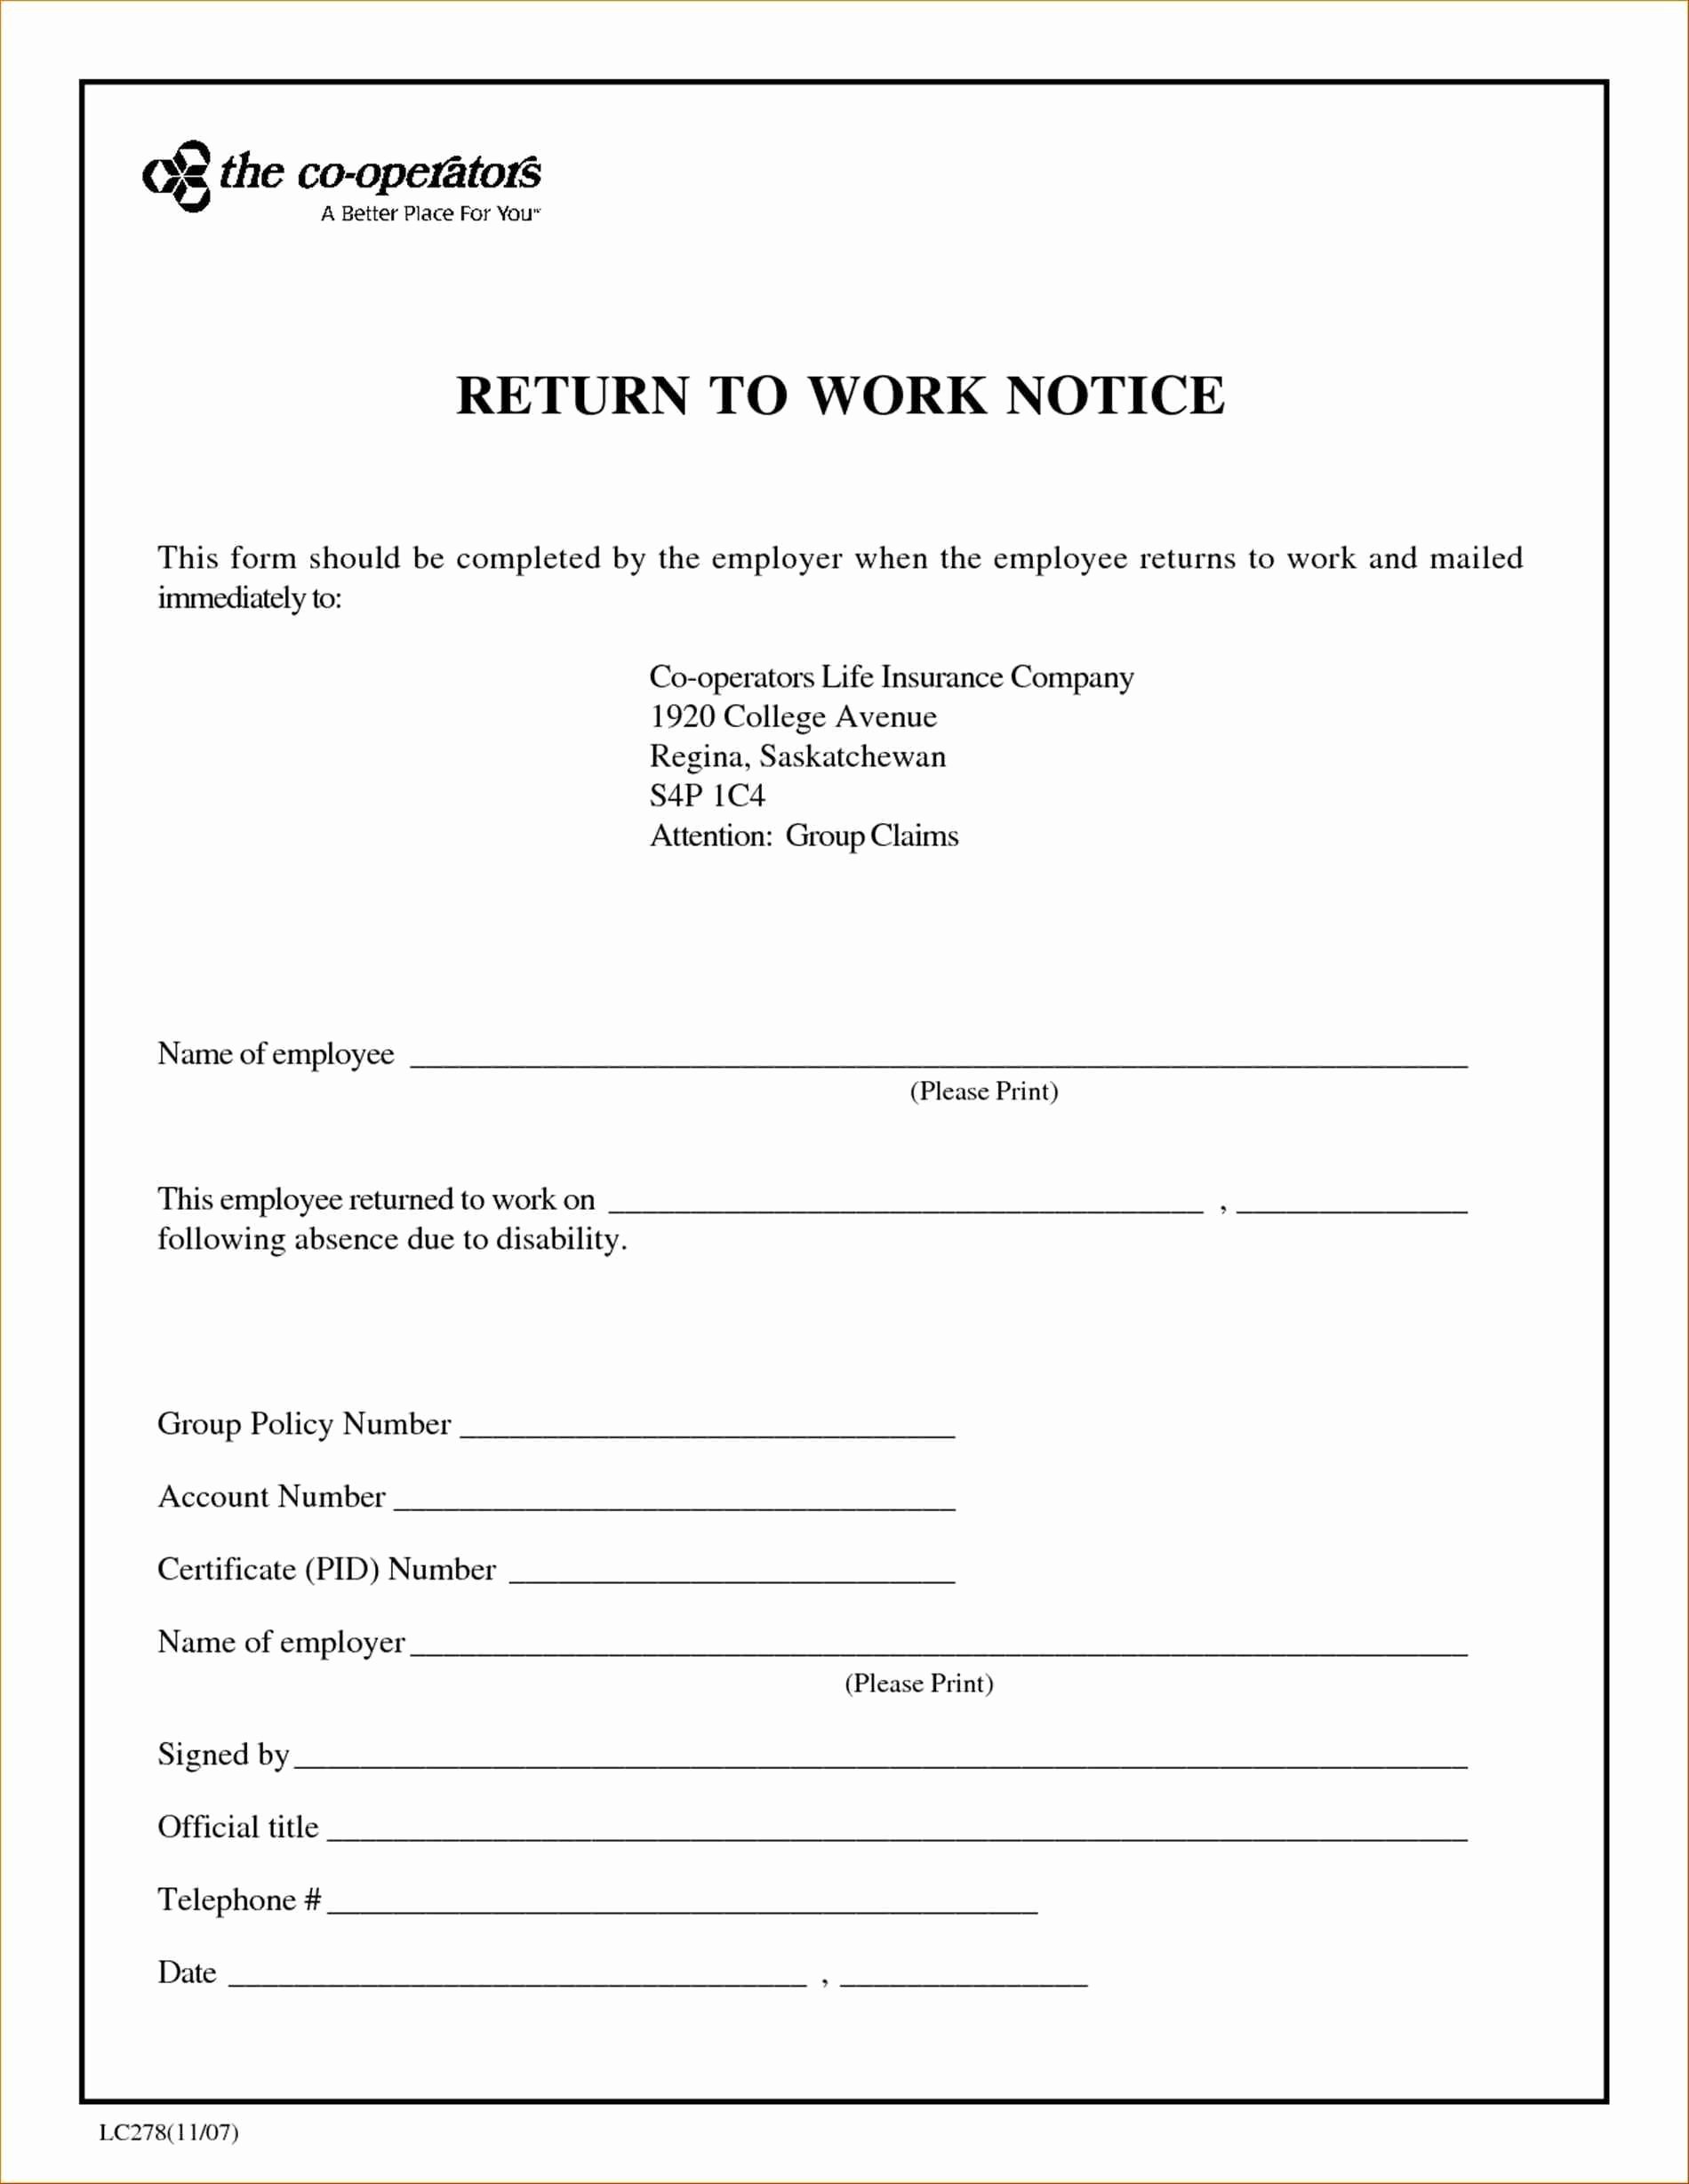 Fake Doctors Note for School Unique Fake Doctors Note for Work or School Pdf